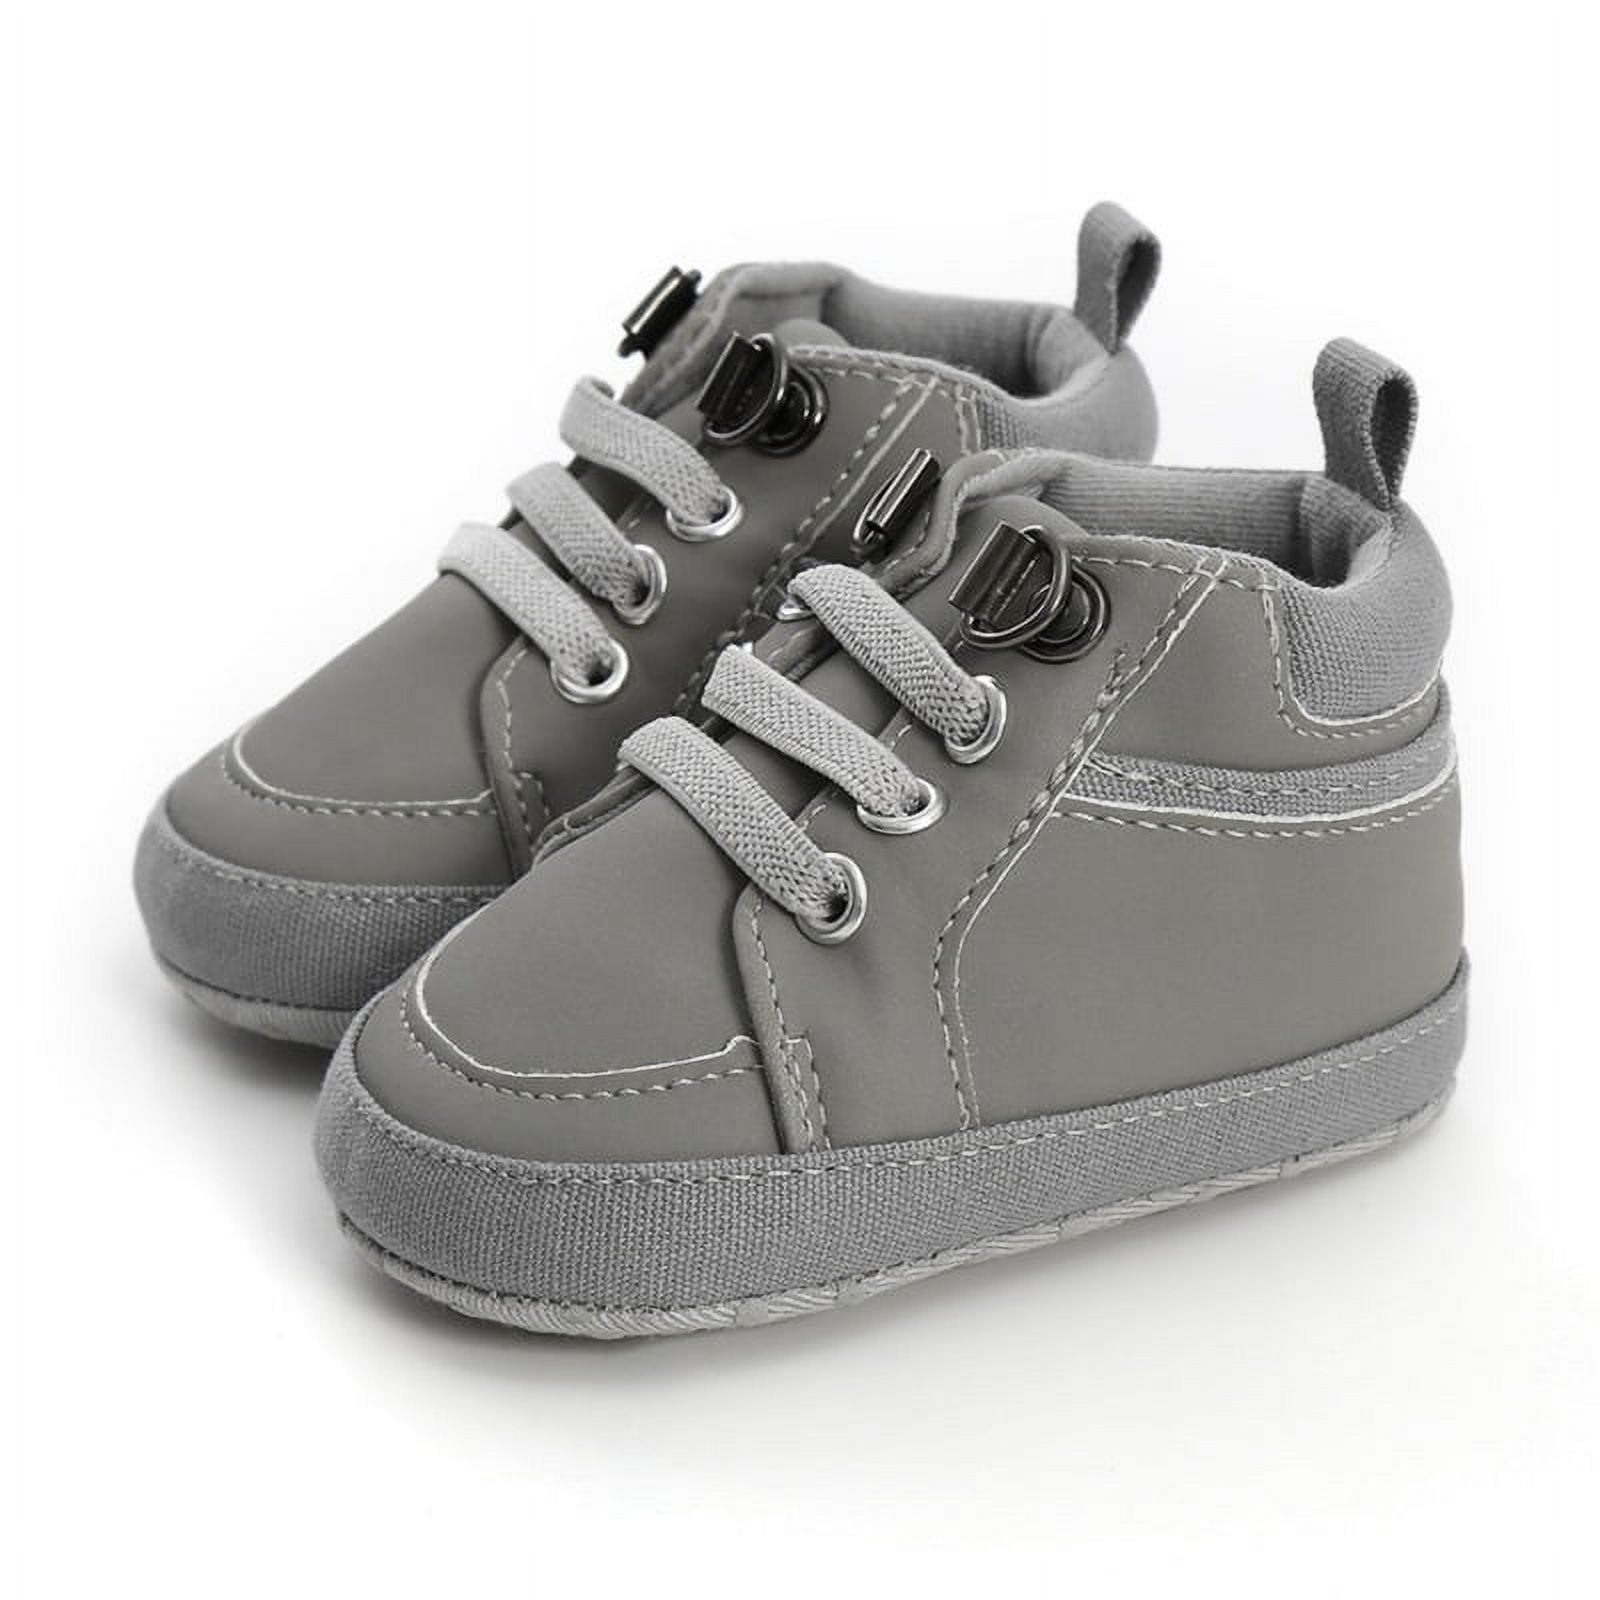 Baby Girls Boys Walking Shoes Toddler Infant First Walker Soft Sole High-Top Ankle Sneakers Newborn Crib Shoe - image 2 of 7